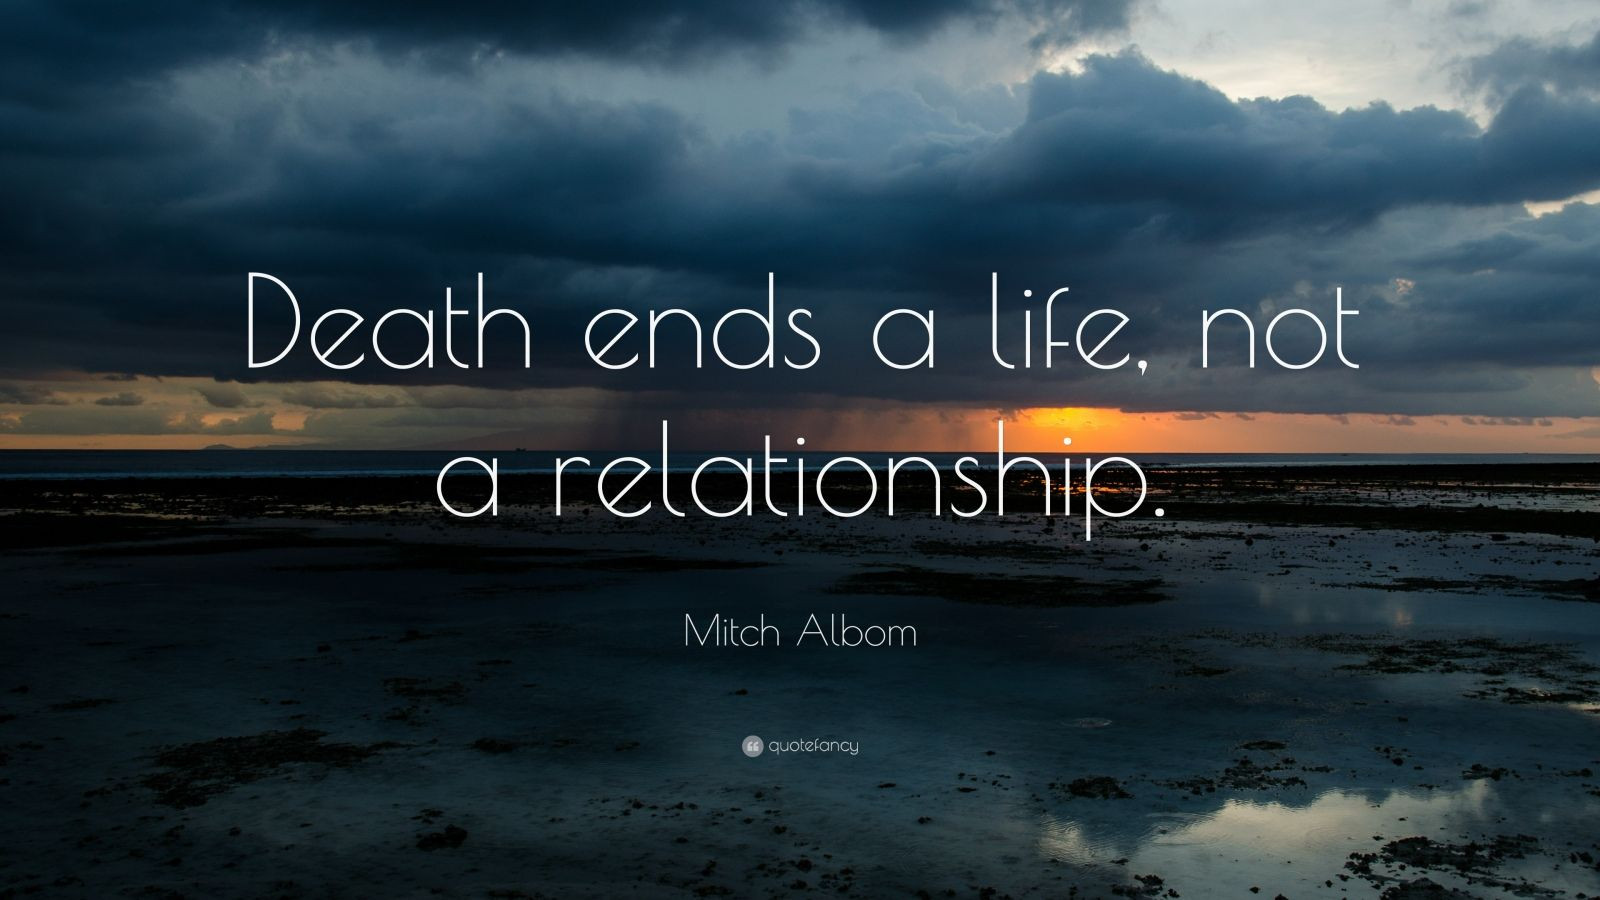 Life And Relationships Quotes
 Relationship Quotes 58 wallpapers Quotefancy